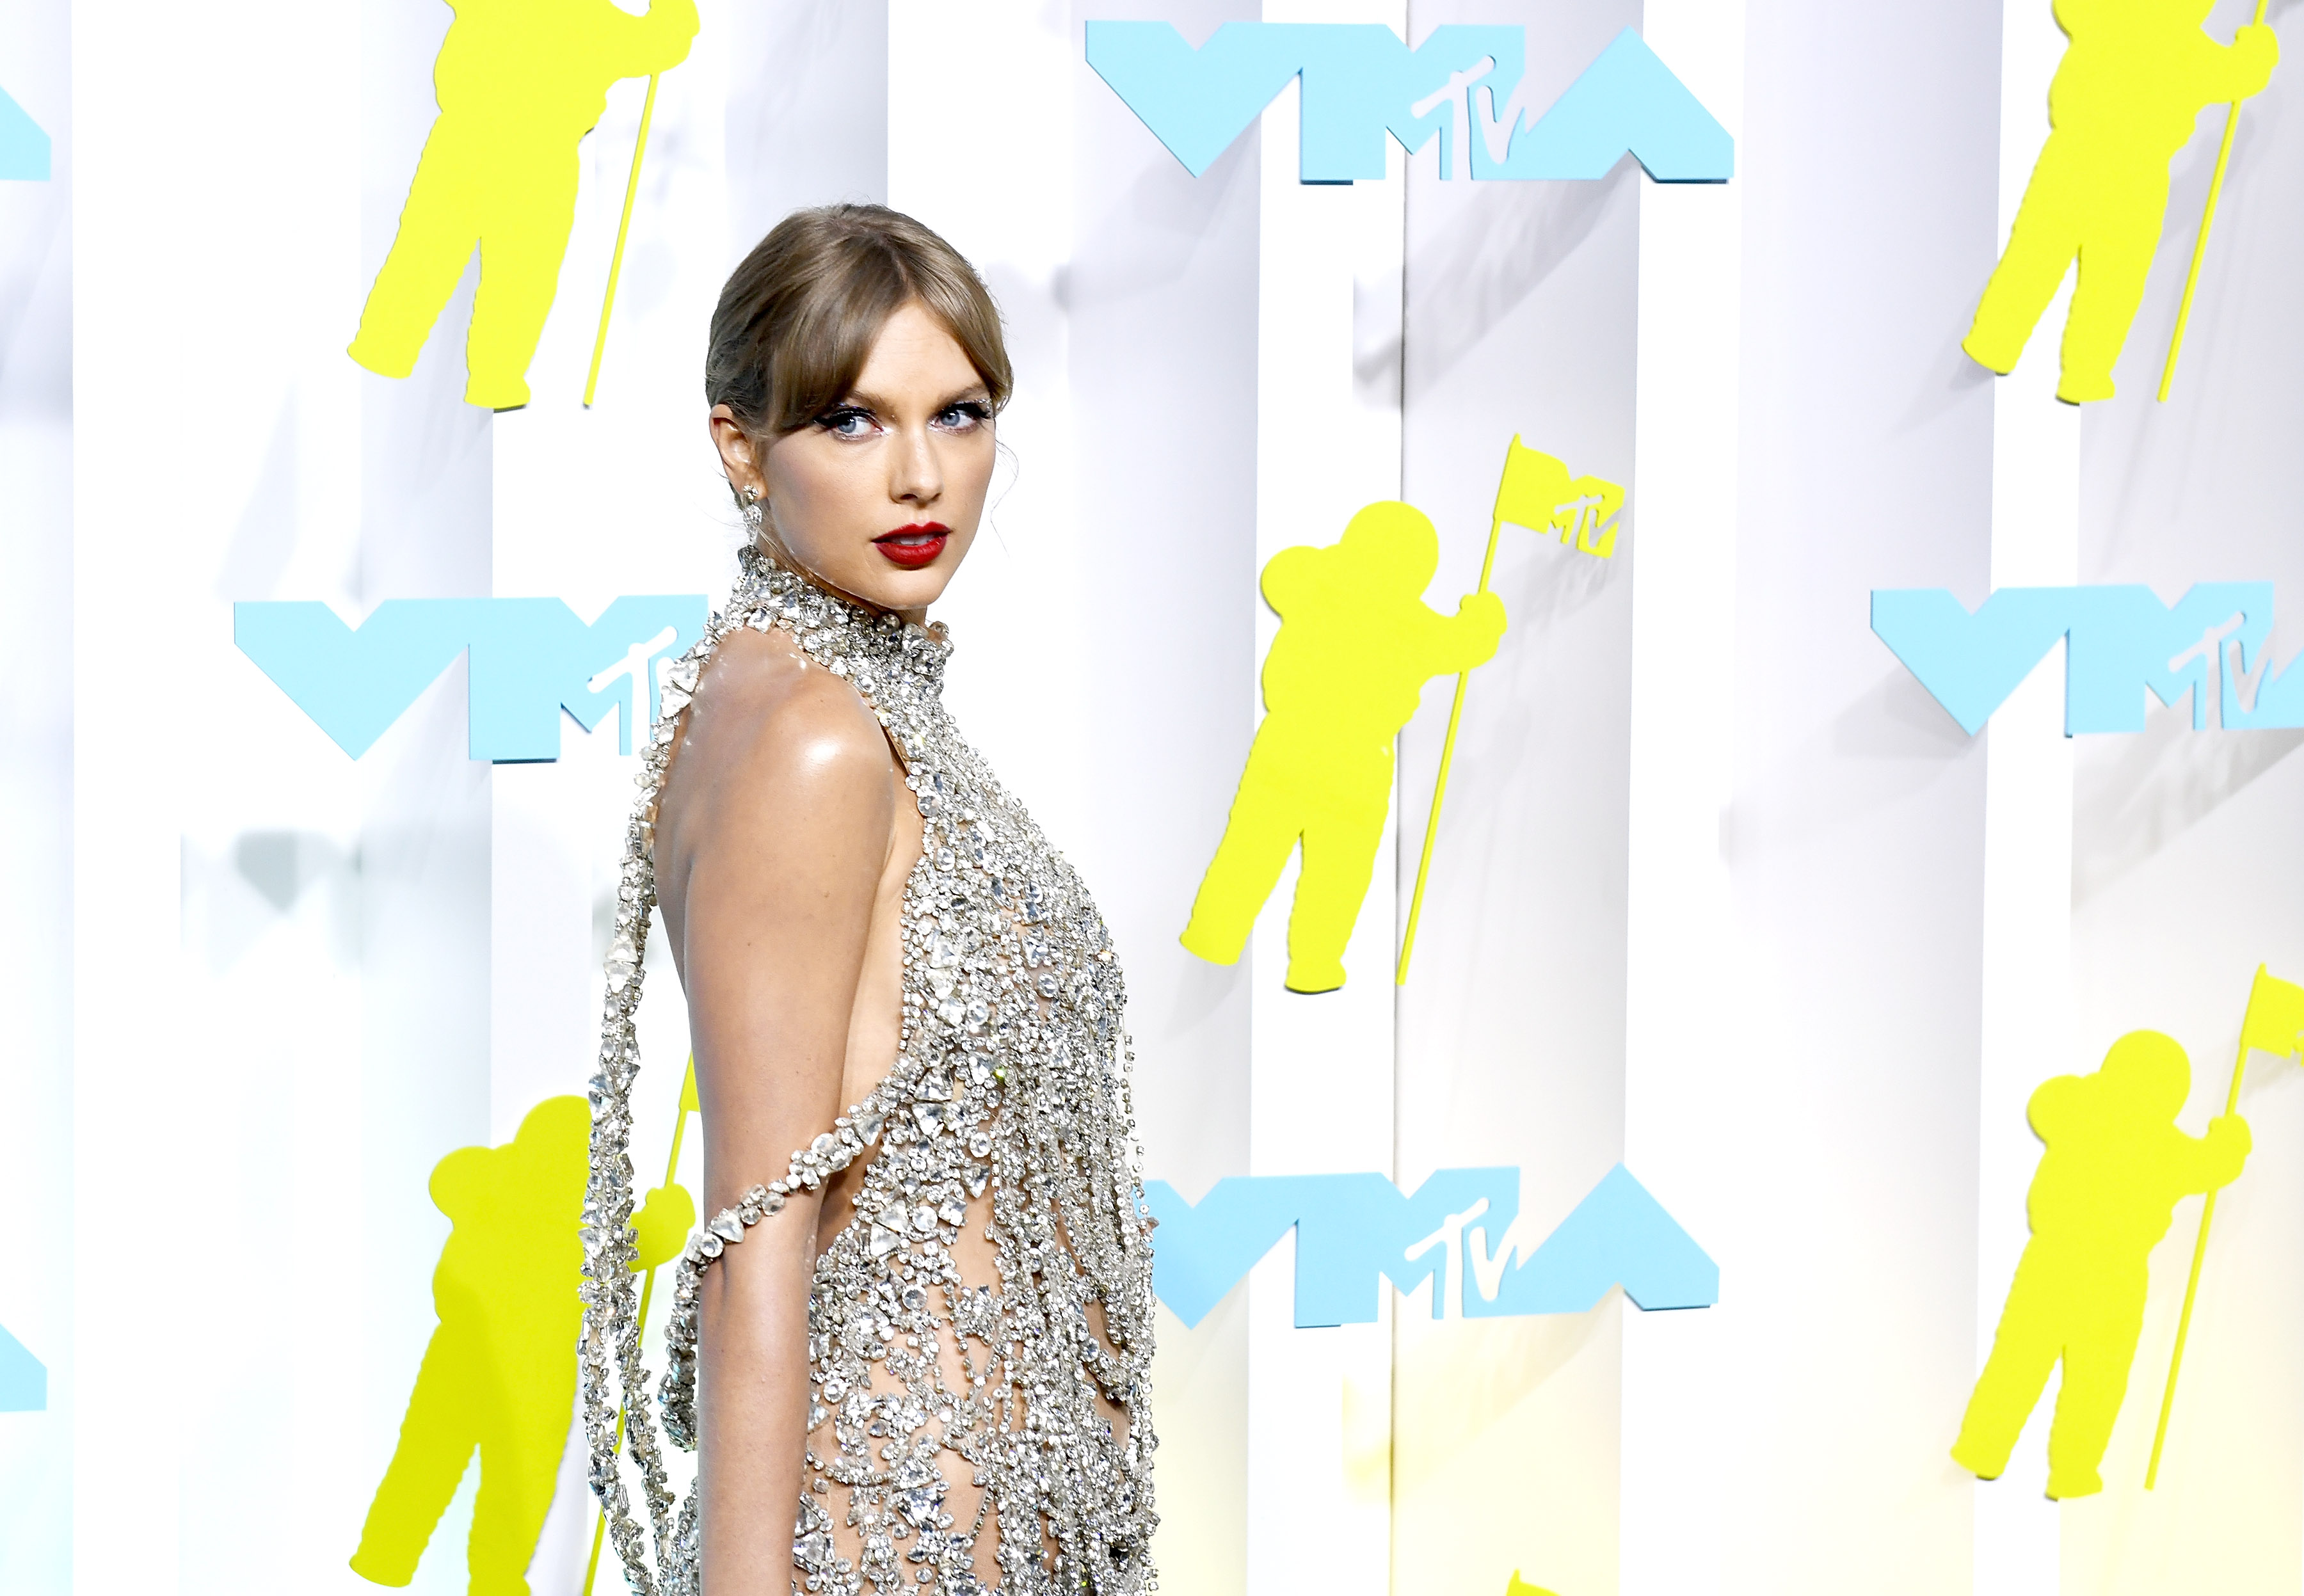 Taylor Swift's Latest Album Is About 'Finding Love' Amid 'Noise